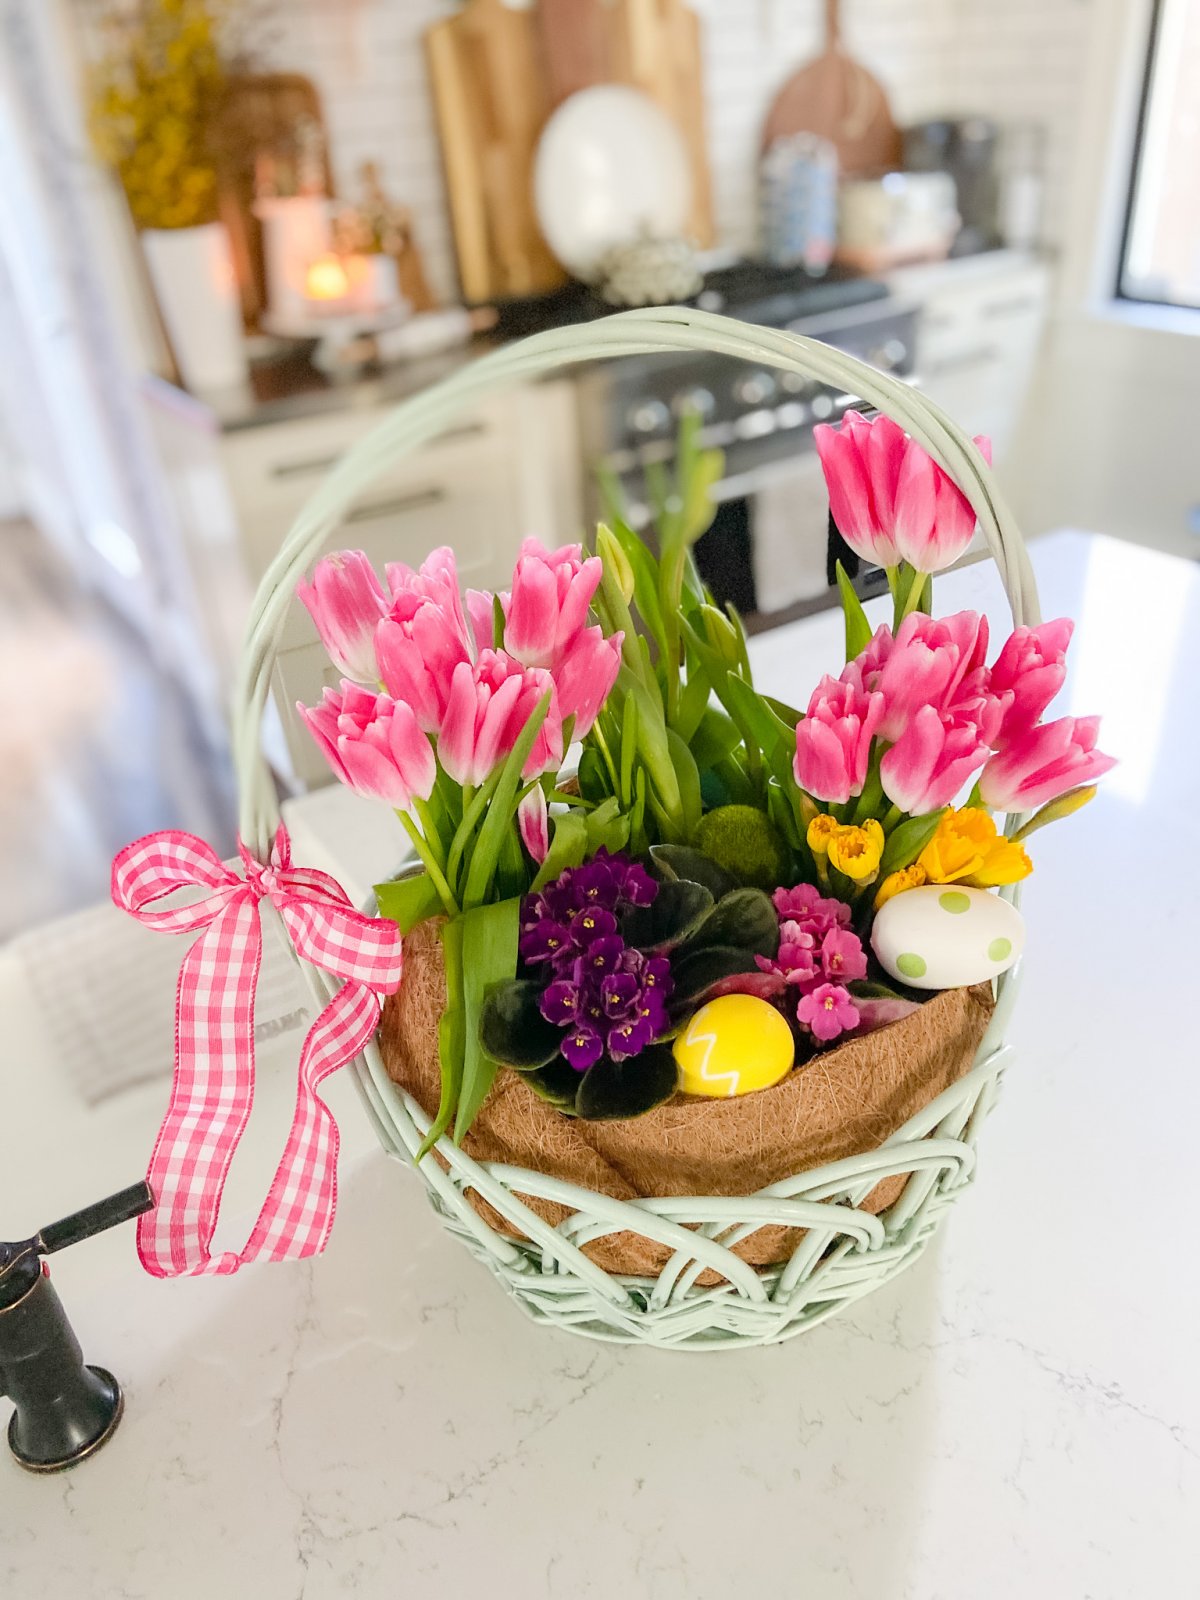 Easter Basket Living Floral Centerpiece. Take an Easter basket, plant flowers inside and cover with a dollar store coir liner for a beautiful spring living centerpiece.